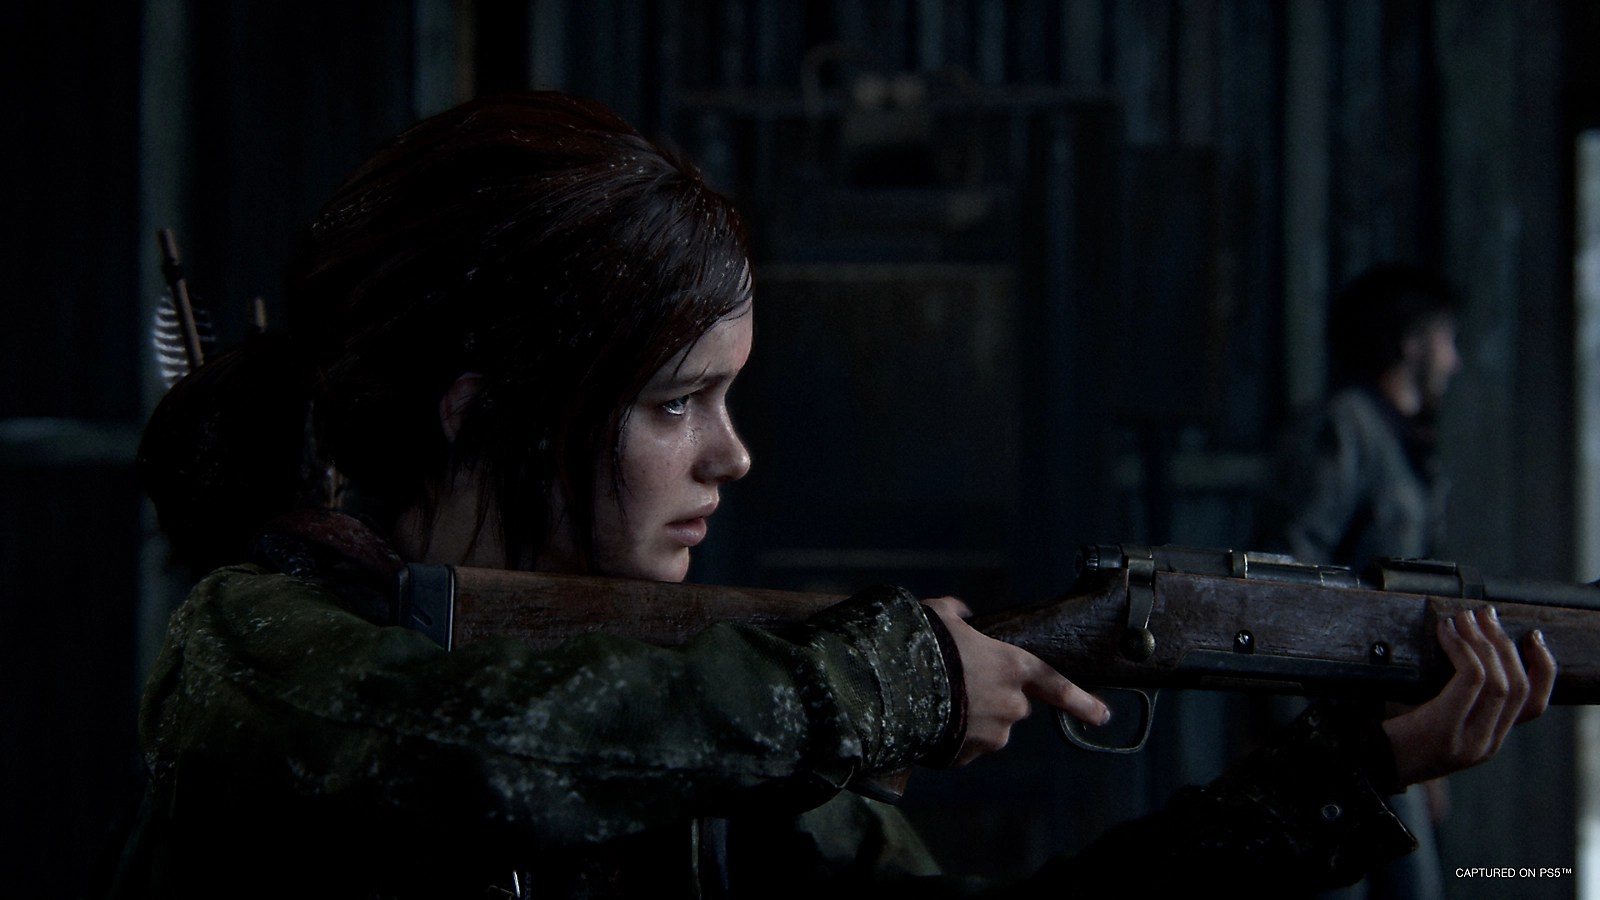 The Last of Us Part 1 revisits Joel and Ellie in breathtaking